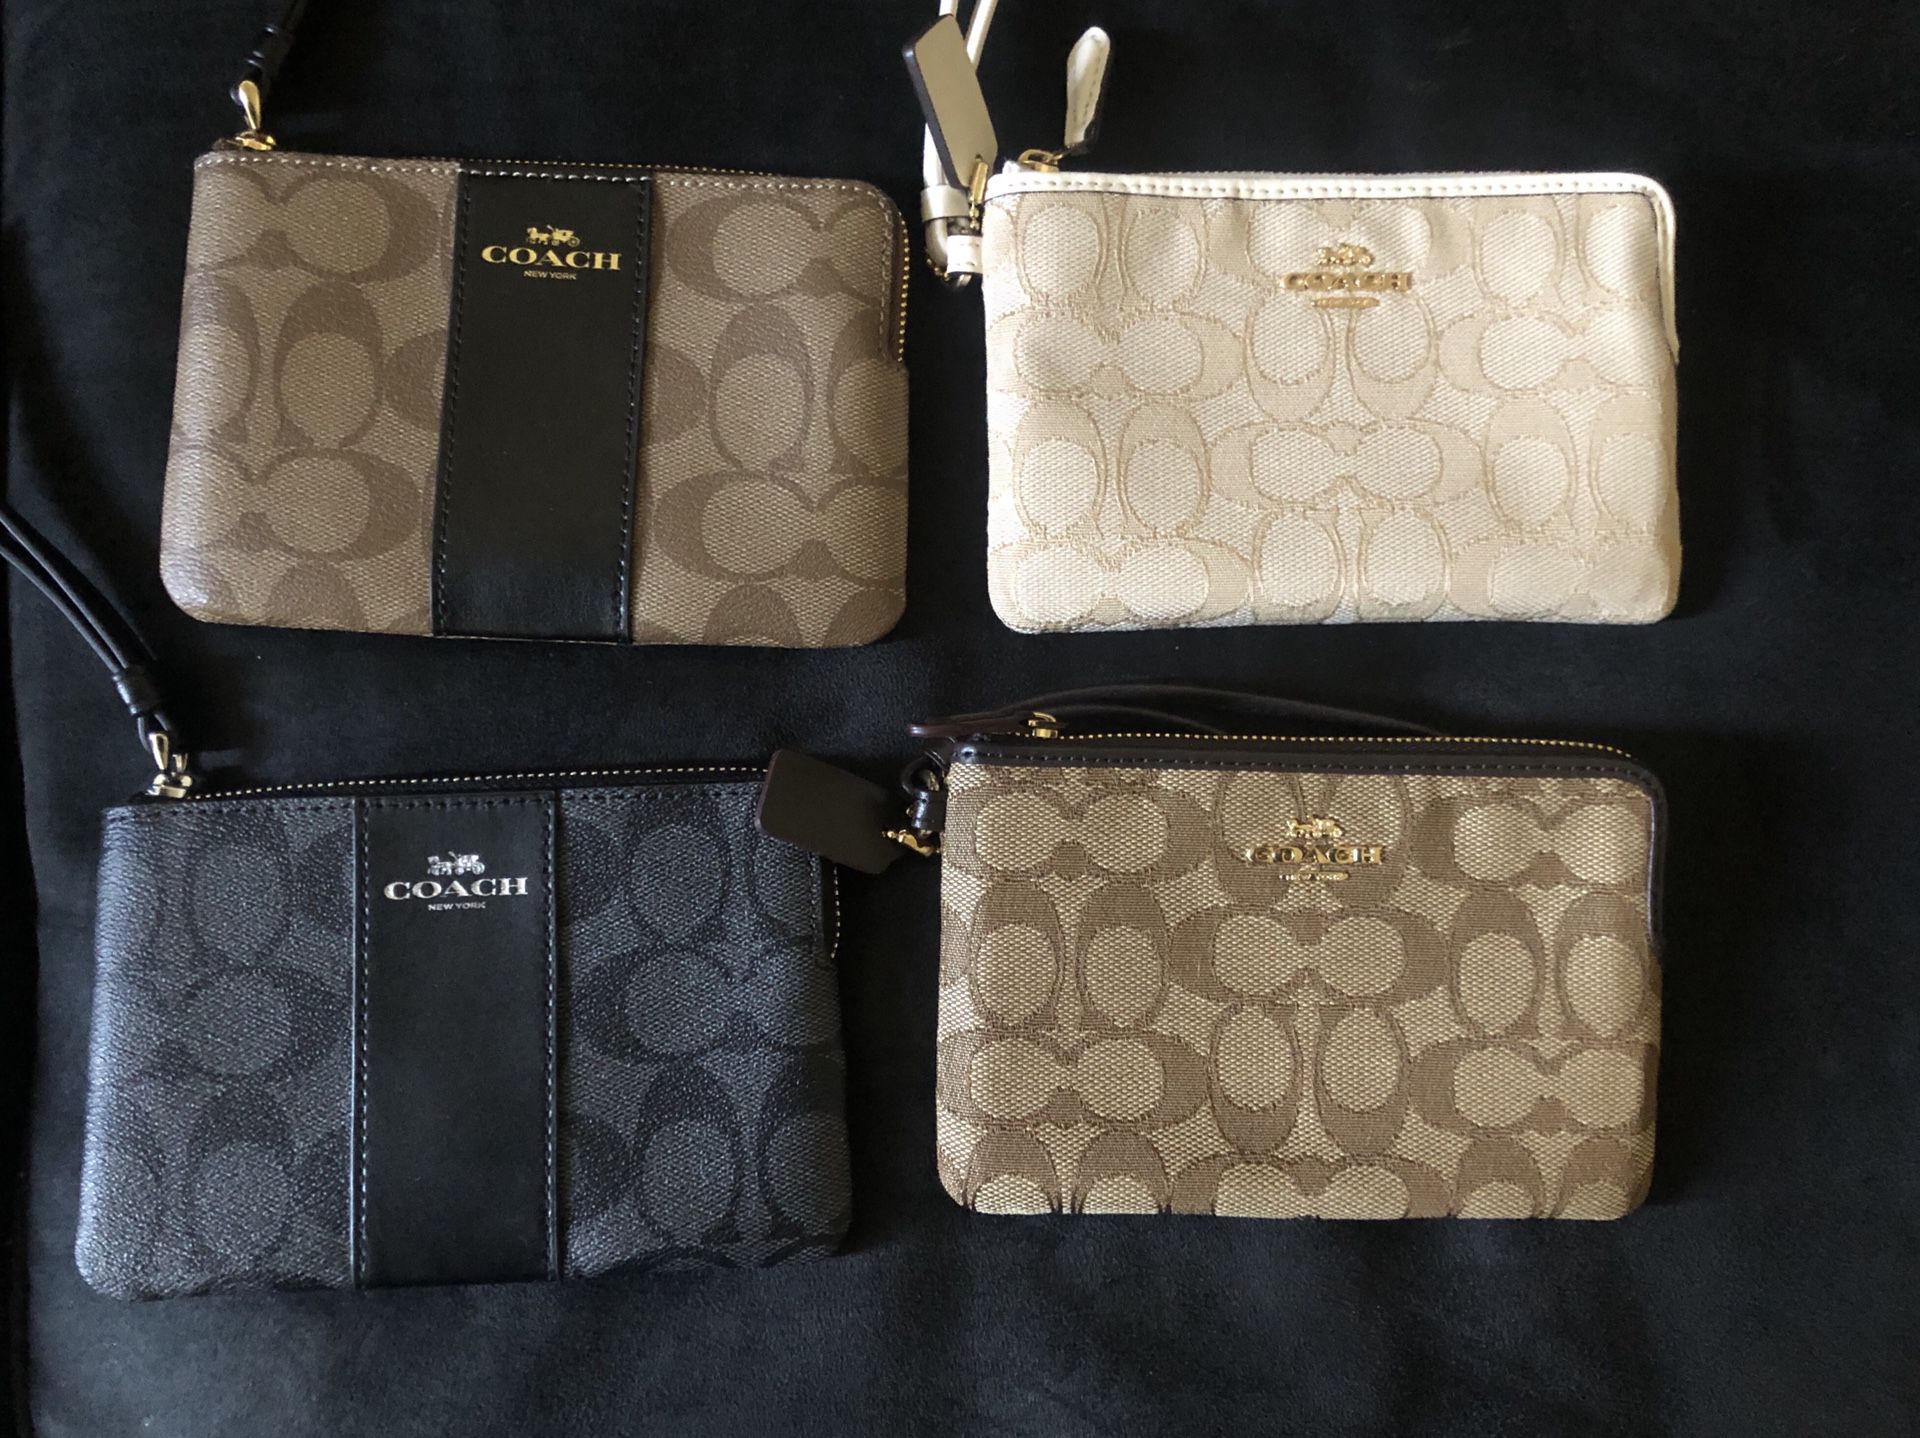 4 brand new coach wristlets purchased directly from store originally $78 selling each for $45 original tags included $40 if you pickup